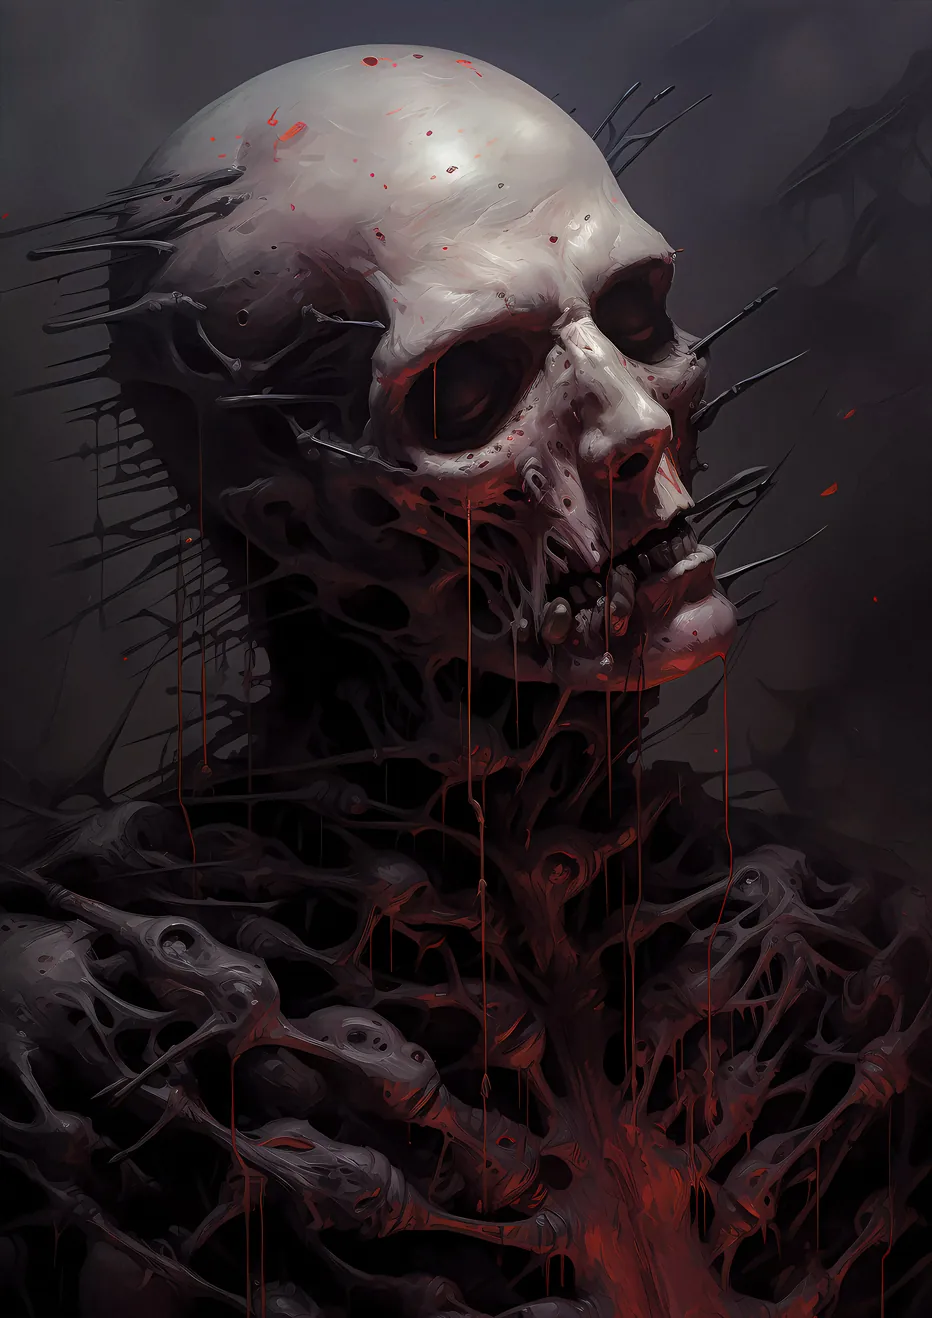 Fading into Bones - A haunting surrealism painting depicting a figure made of intertwining bones with a skull emitting spike-like black matter.